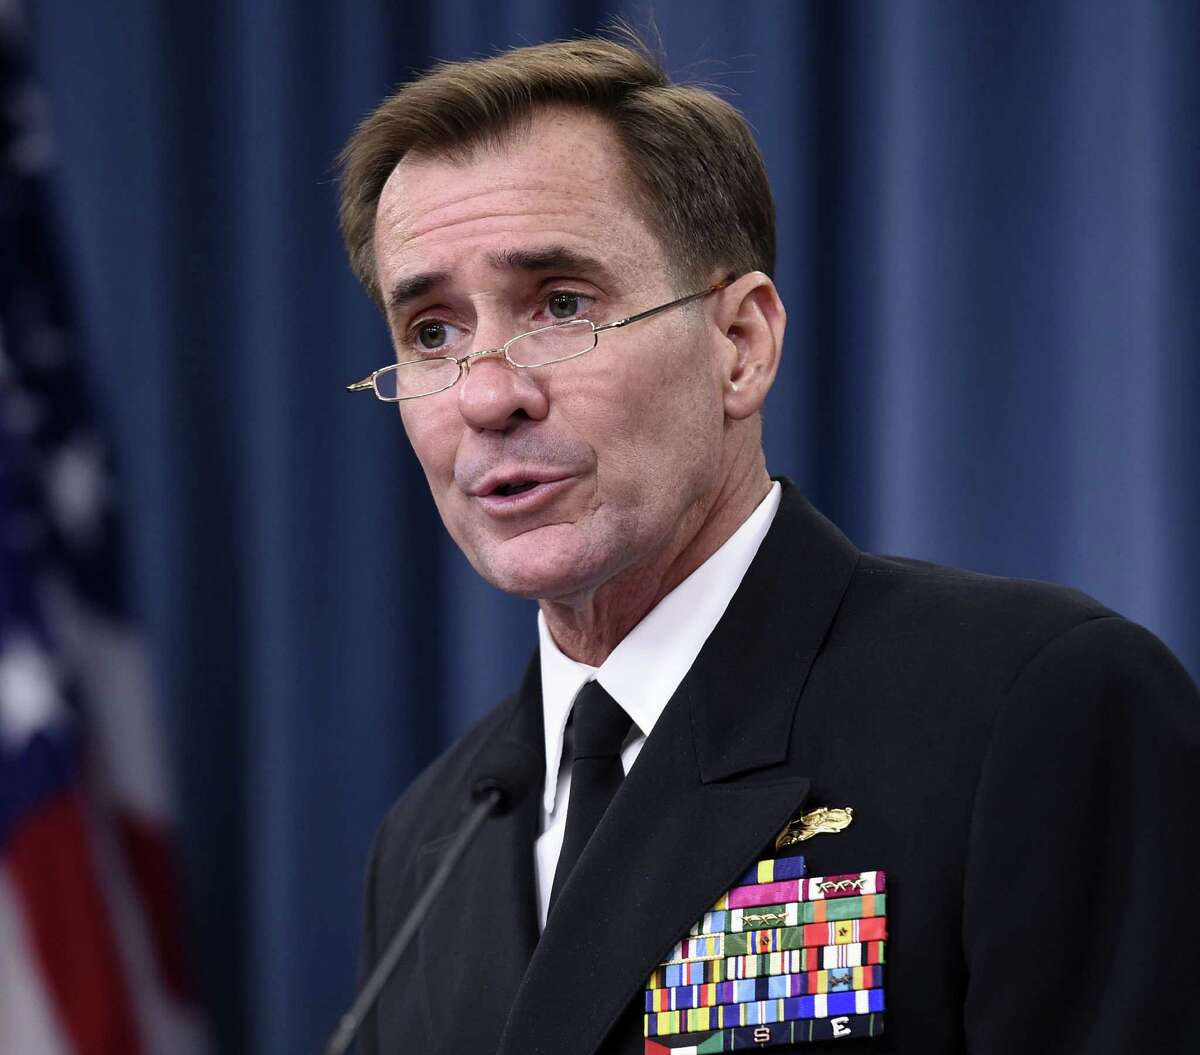 Rear Adm. John Kirby said fighters, bombers and Tomahawk missiles were used in the attacks on extremists in Syria.